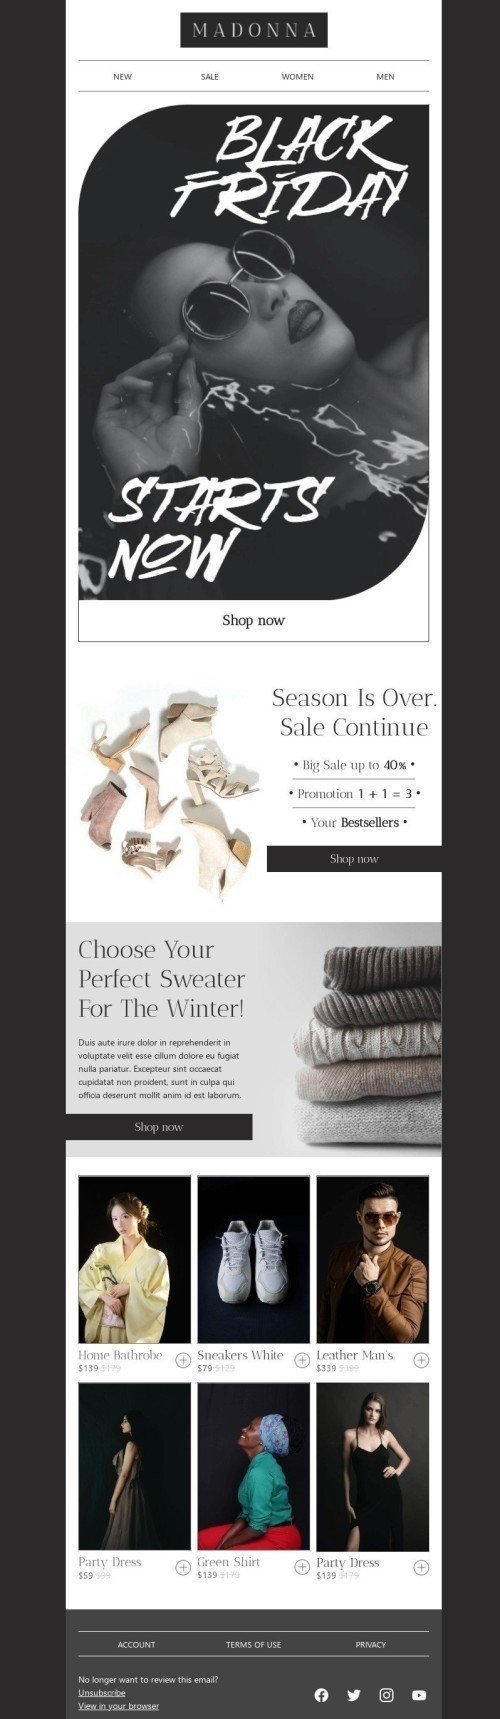 Black Friday Email Template «Choose your perfect sweater» for Fashion industry desktop view